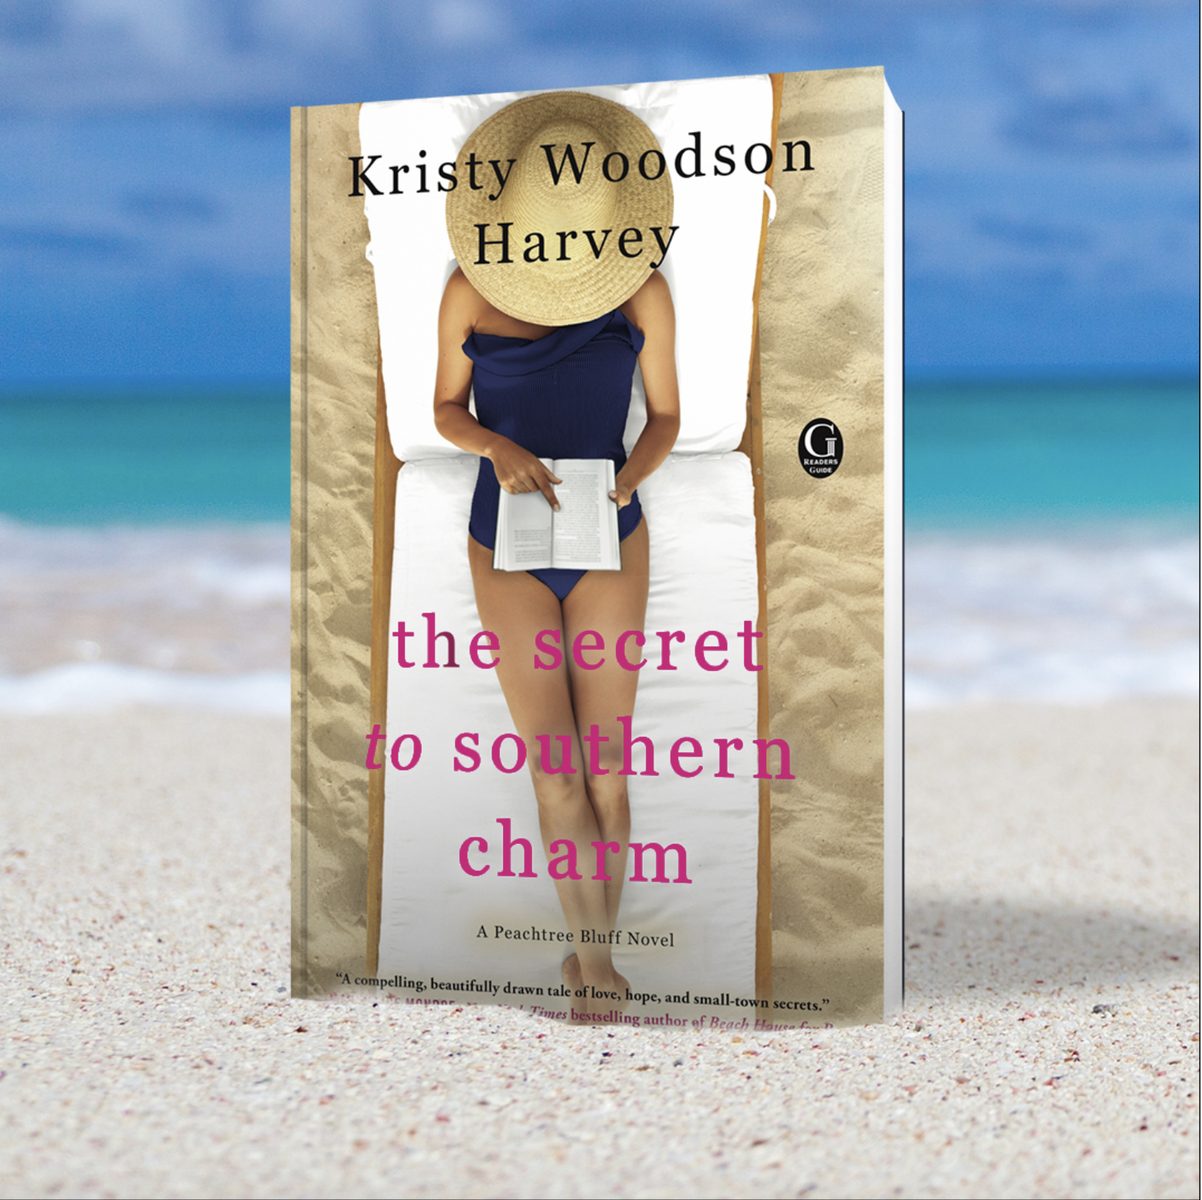 The Secret of Southern Charm - A Must Read for Summer